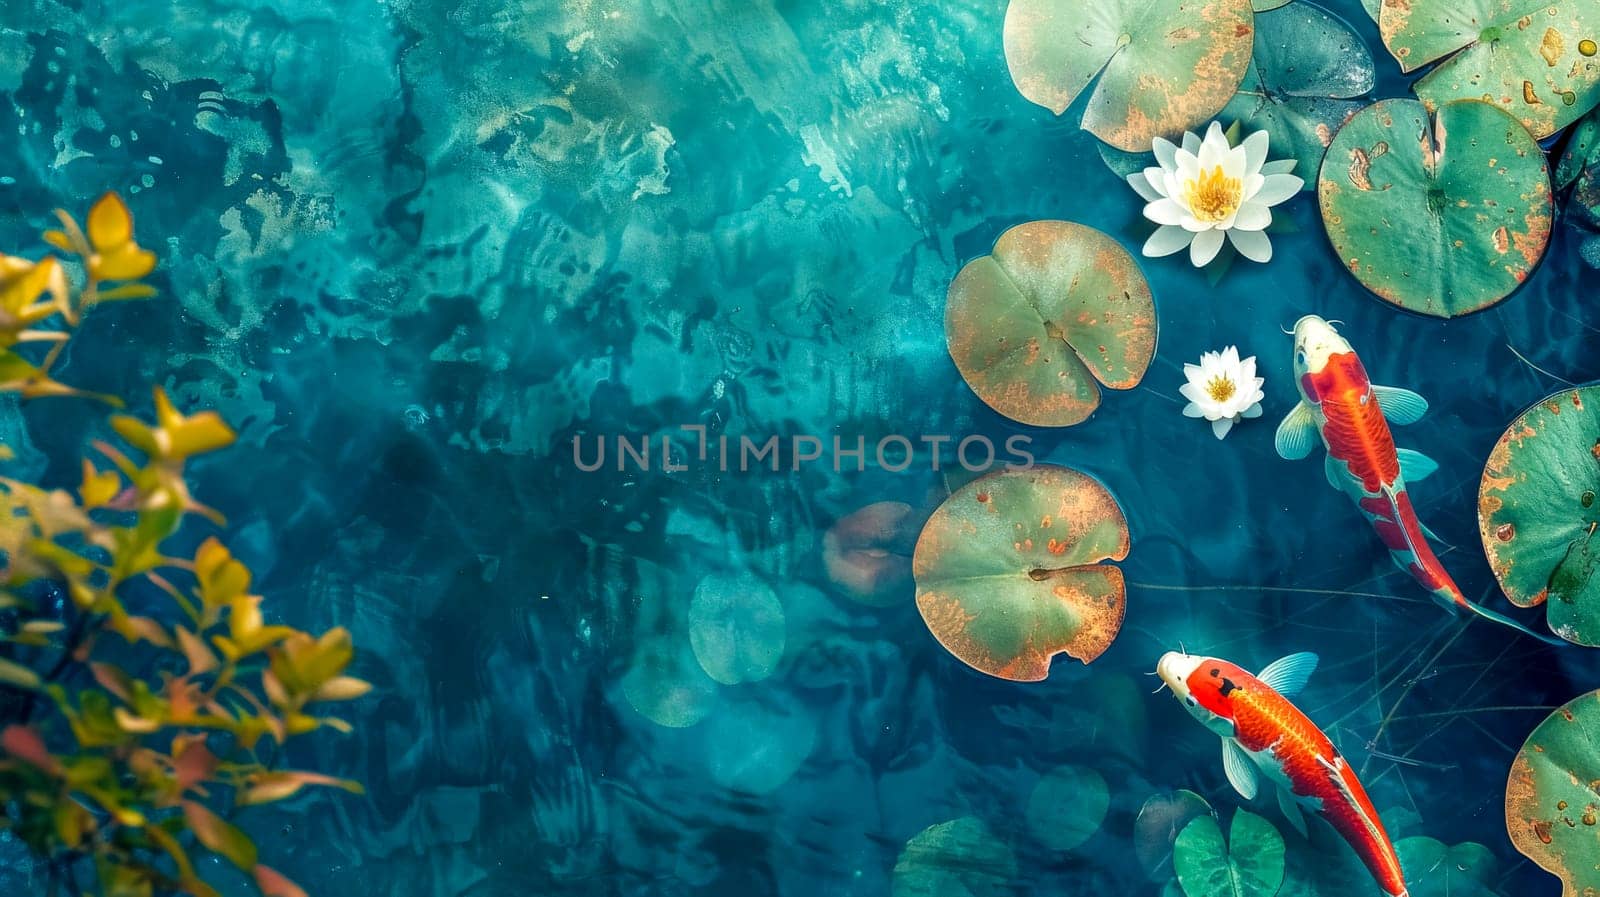 Serene pond scene with vibrant koi fish swimming among floating lily pads and blossoms